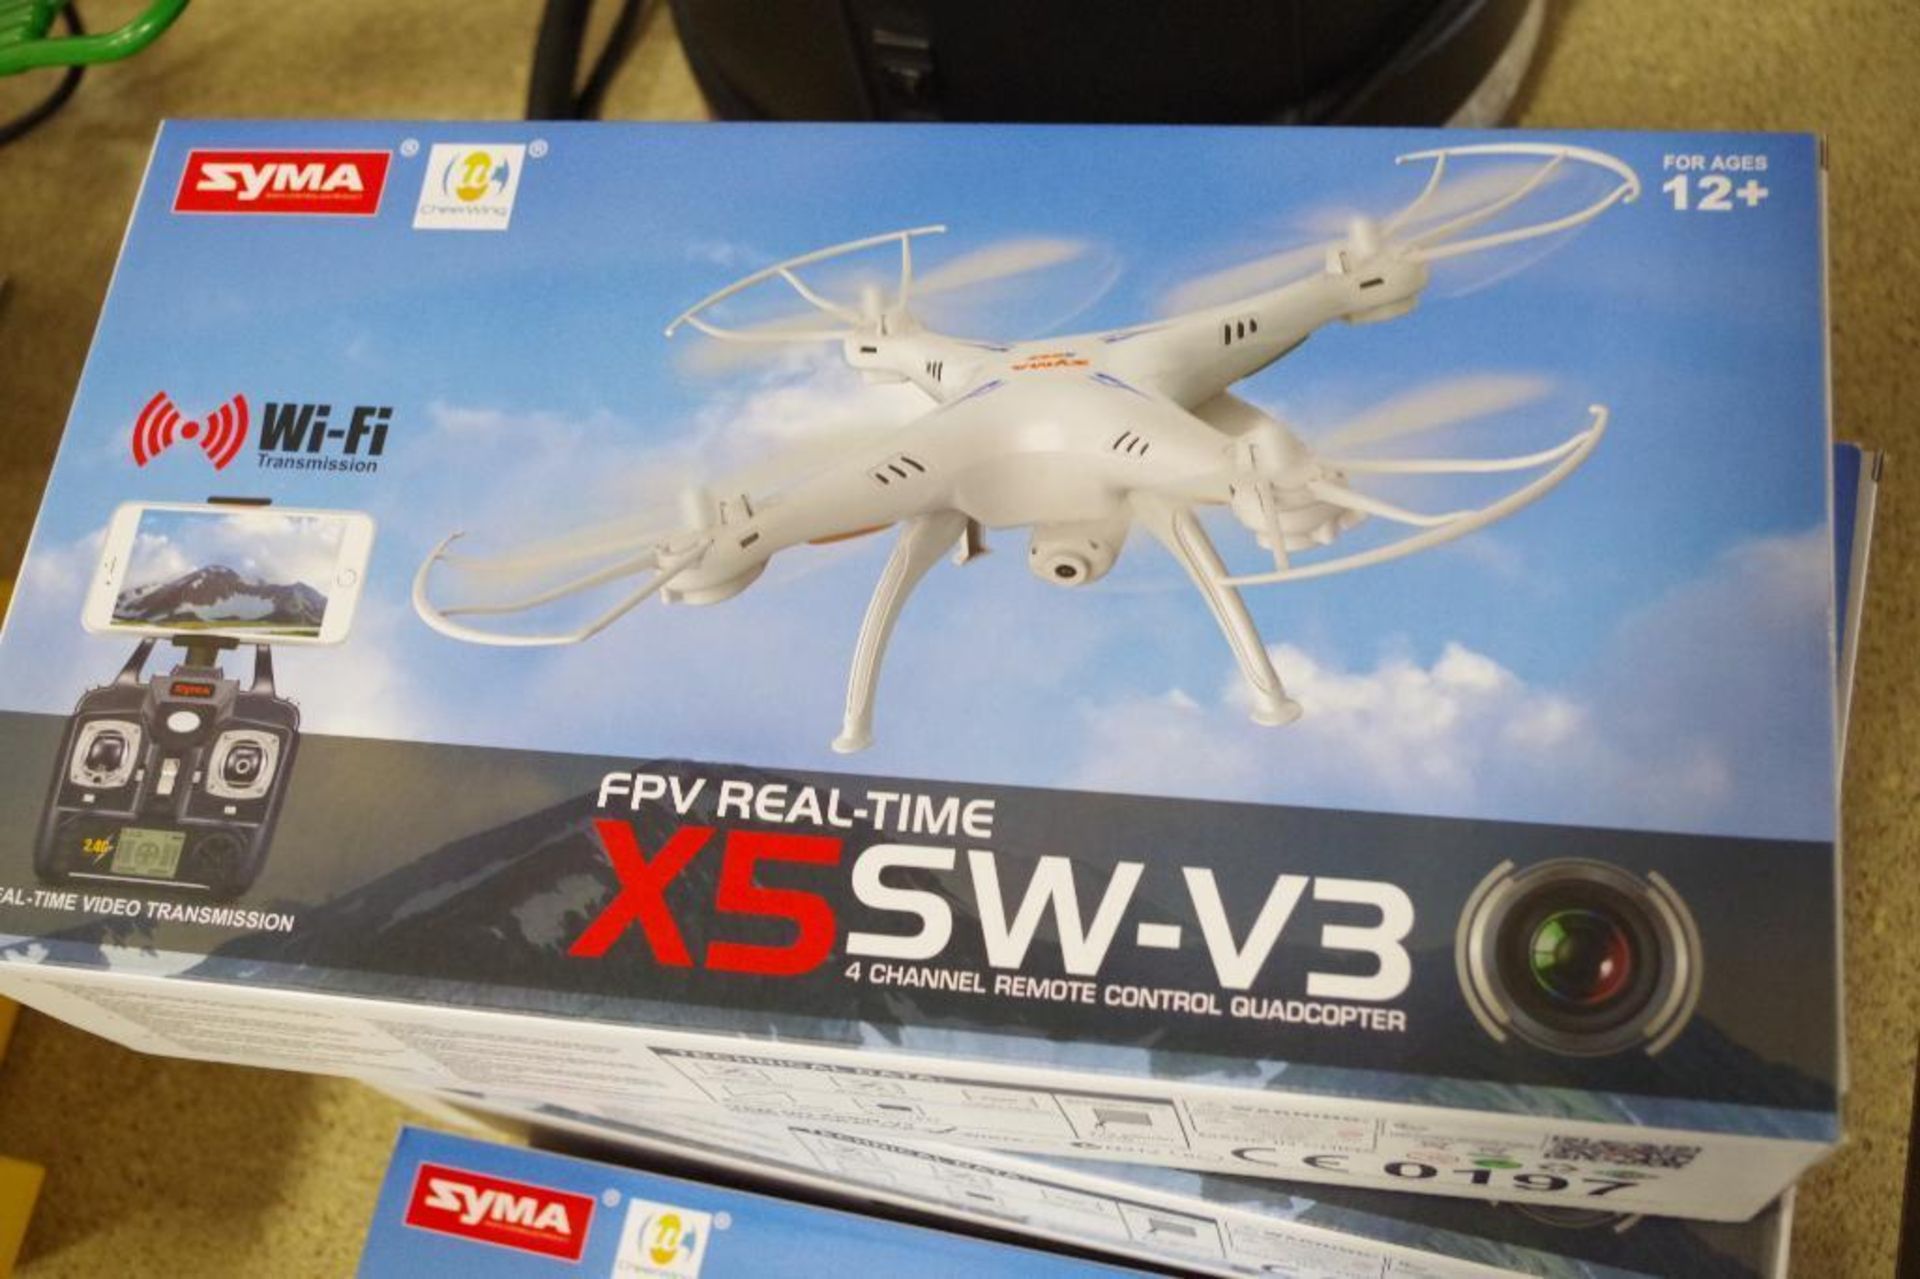 NEW SYMA WiFi FPV 2/4Ghz Quadcopter Drone HD Camera Color: BLACK w/ (2) Additional Batteries - Image 3 of 3